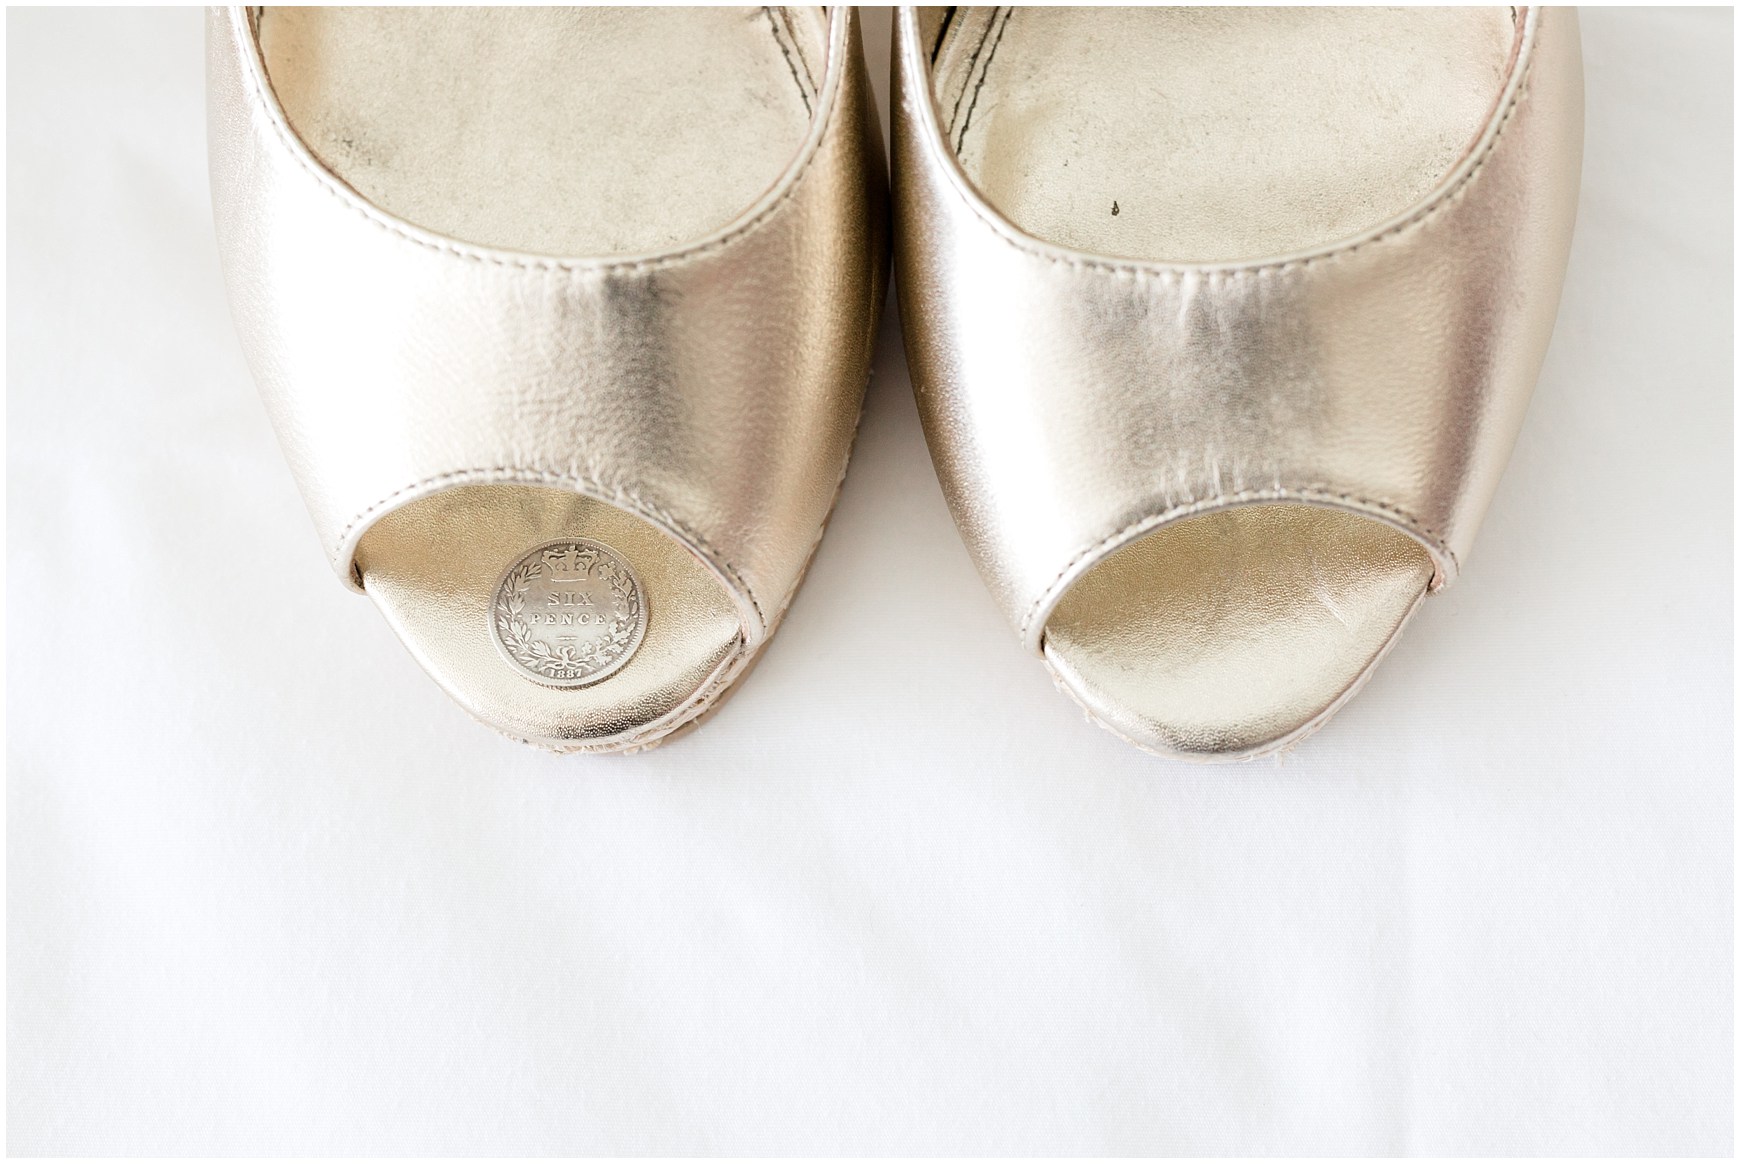 Six Pence in bride's wedding shoes